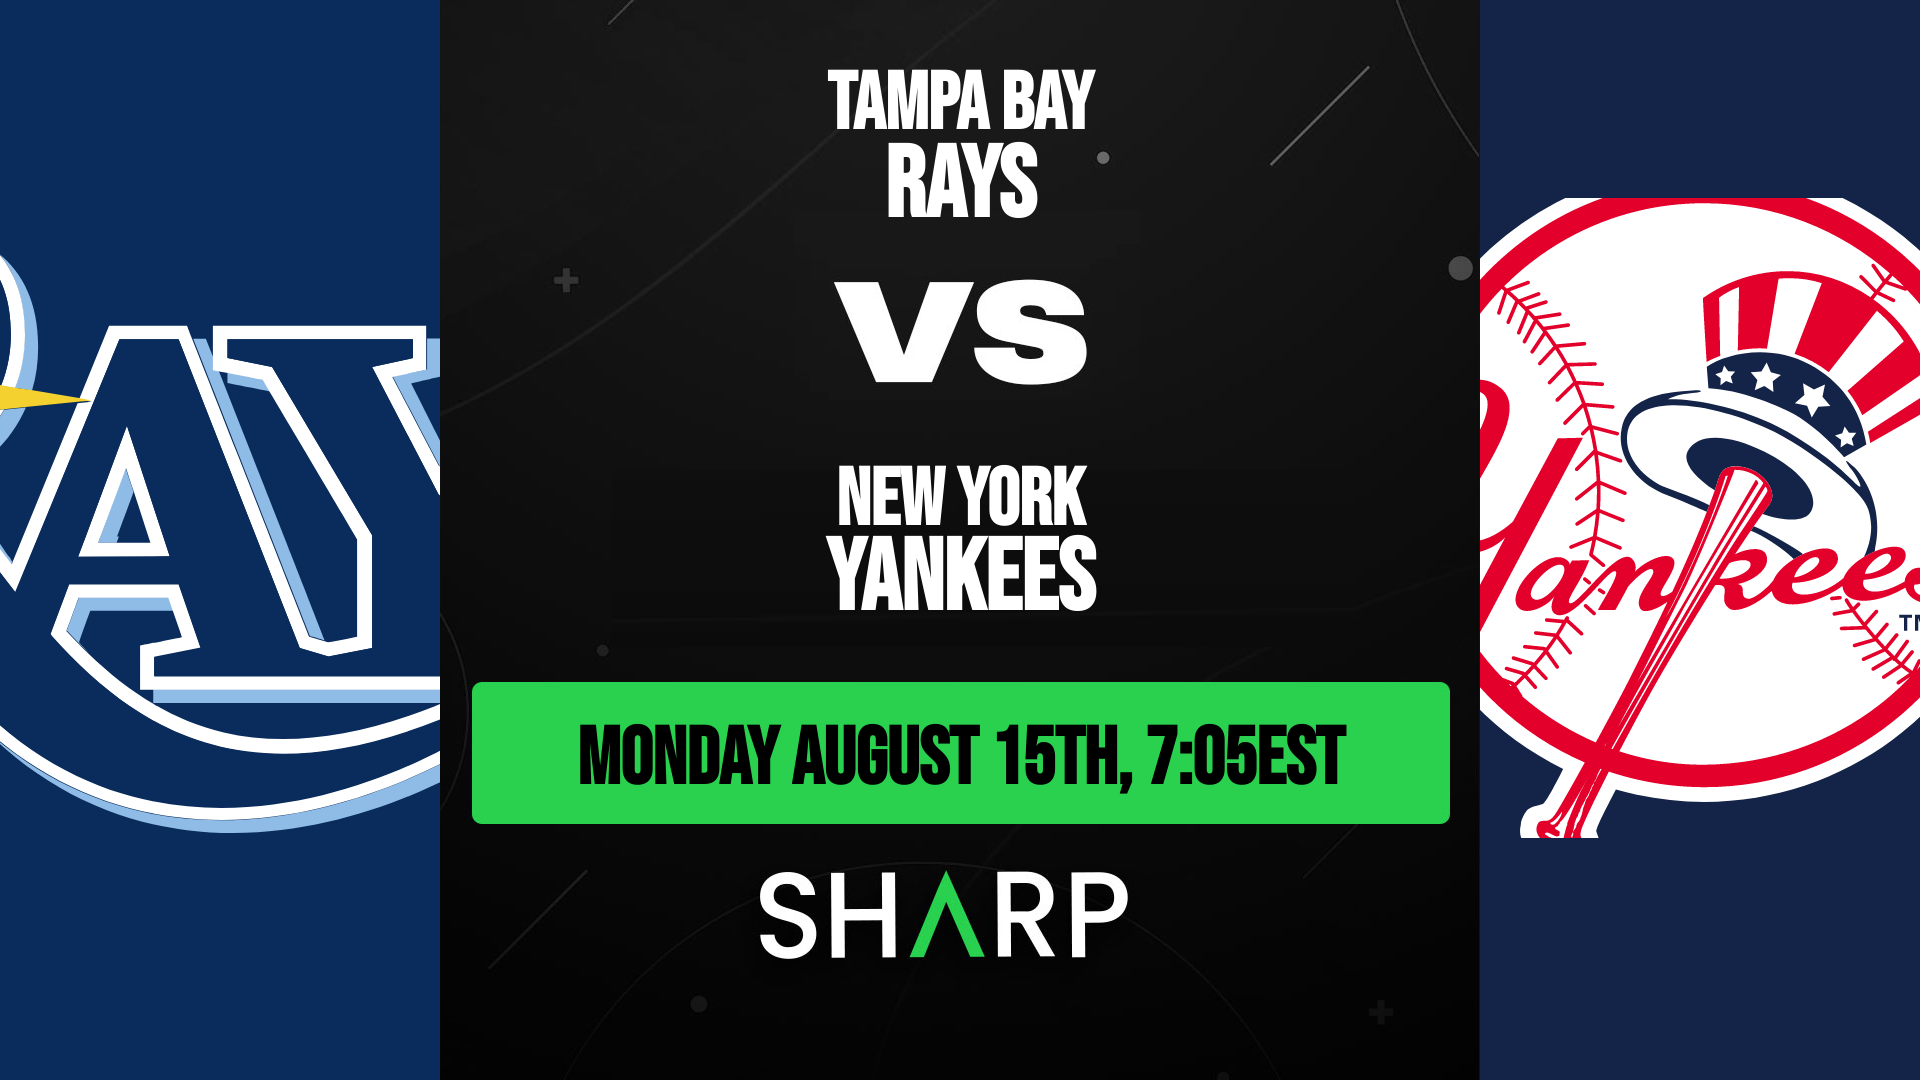 Tampa Bay Rays @ New York Yankees Matchup Preview - August 15th, 2022